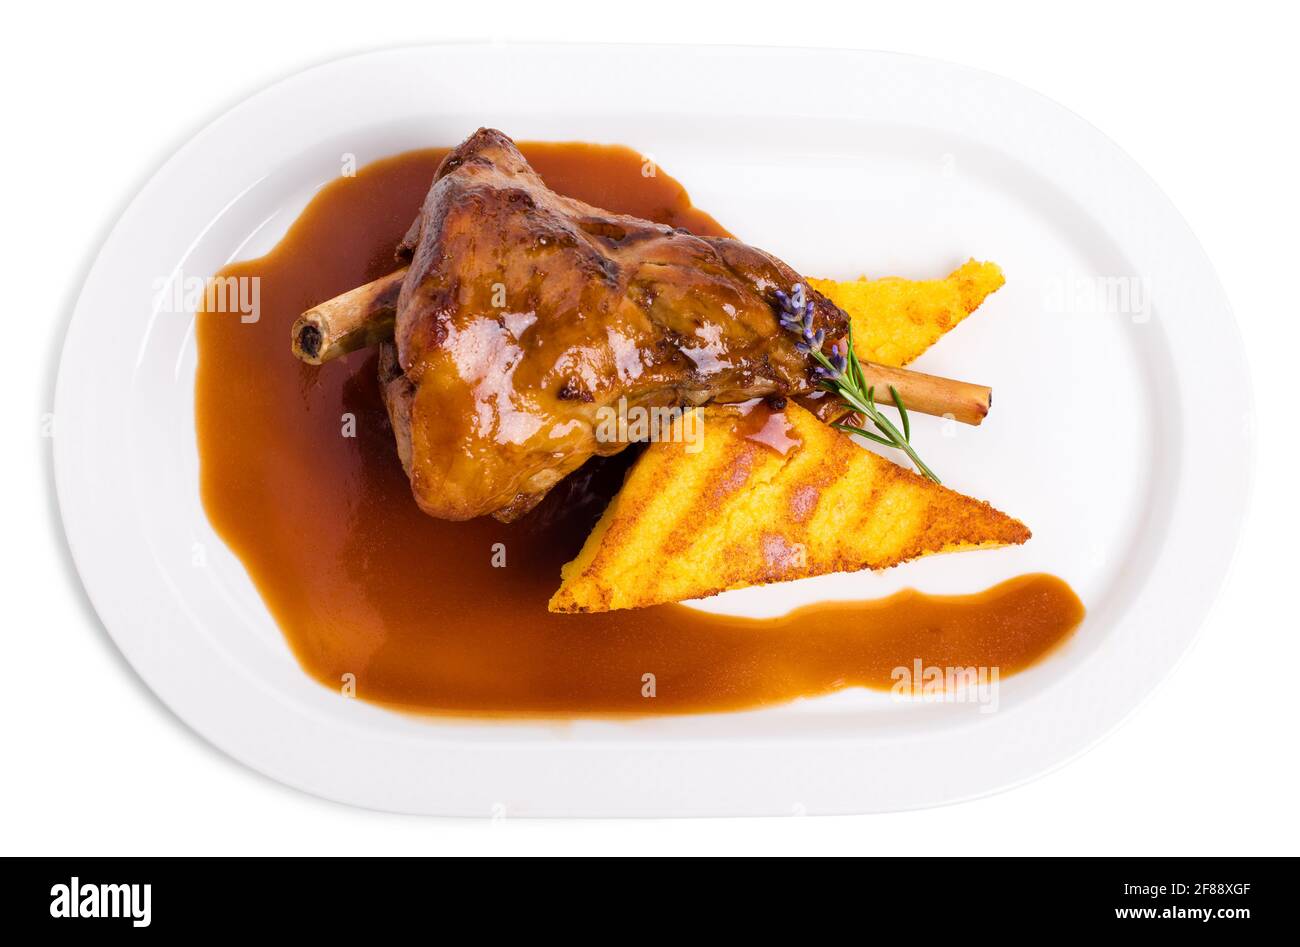 Fried lamb shank with polenta and covered with red sauce. Isolated on a white background. Stock Photo